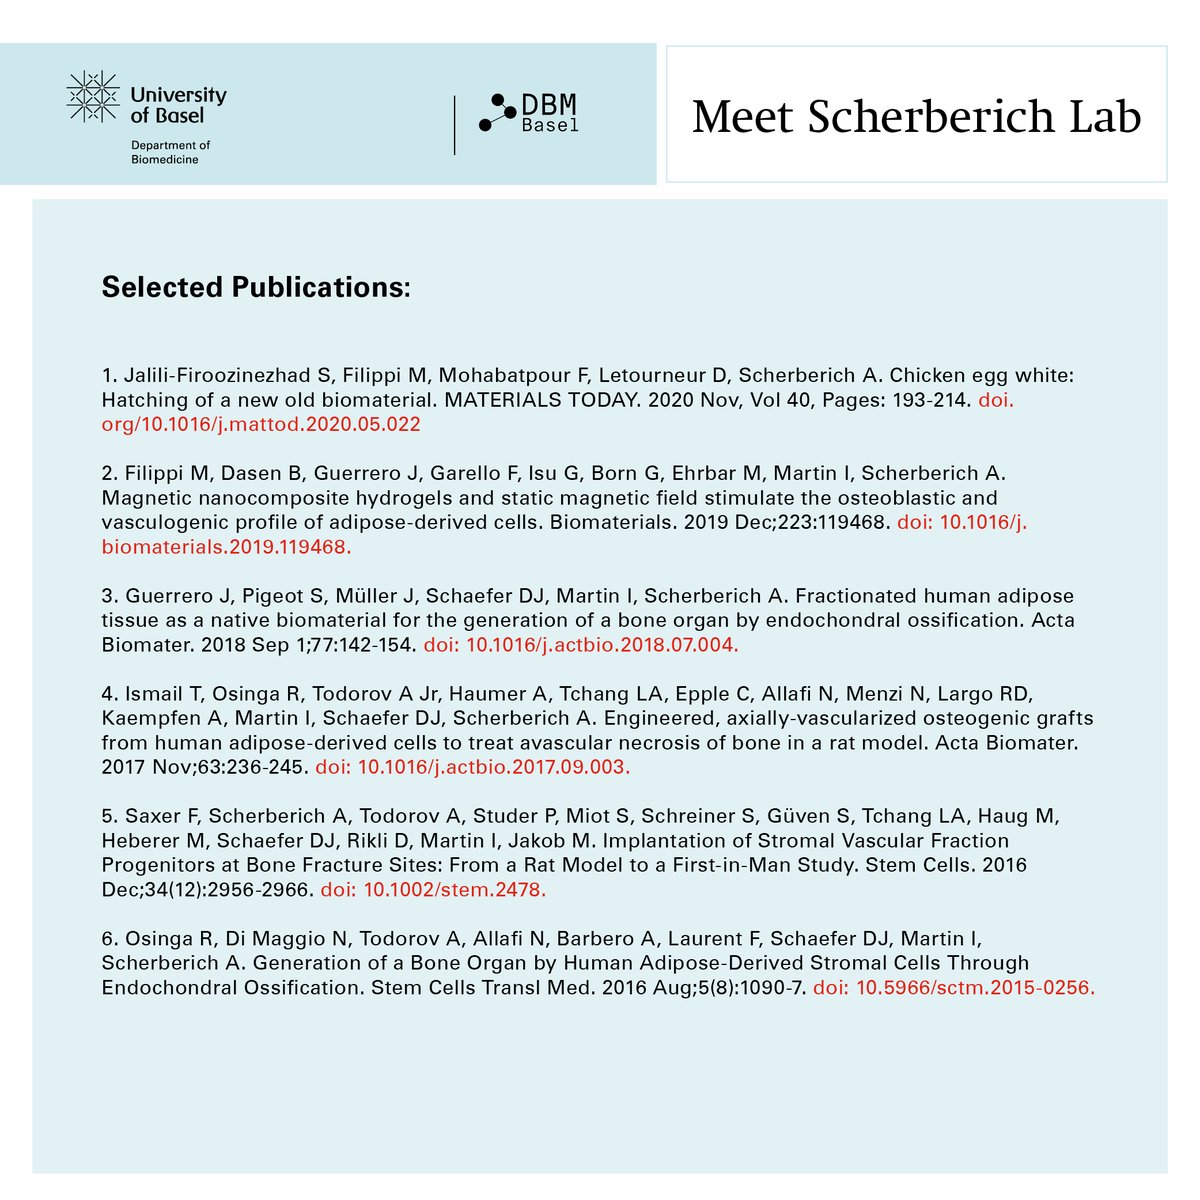 Read more about their future vision and have a look at the selected publications of the Scherberich Lab! #teamDBMBasel #teamwork #boneregeneration #vascularizedbone #research